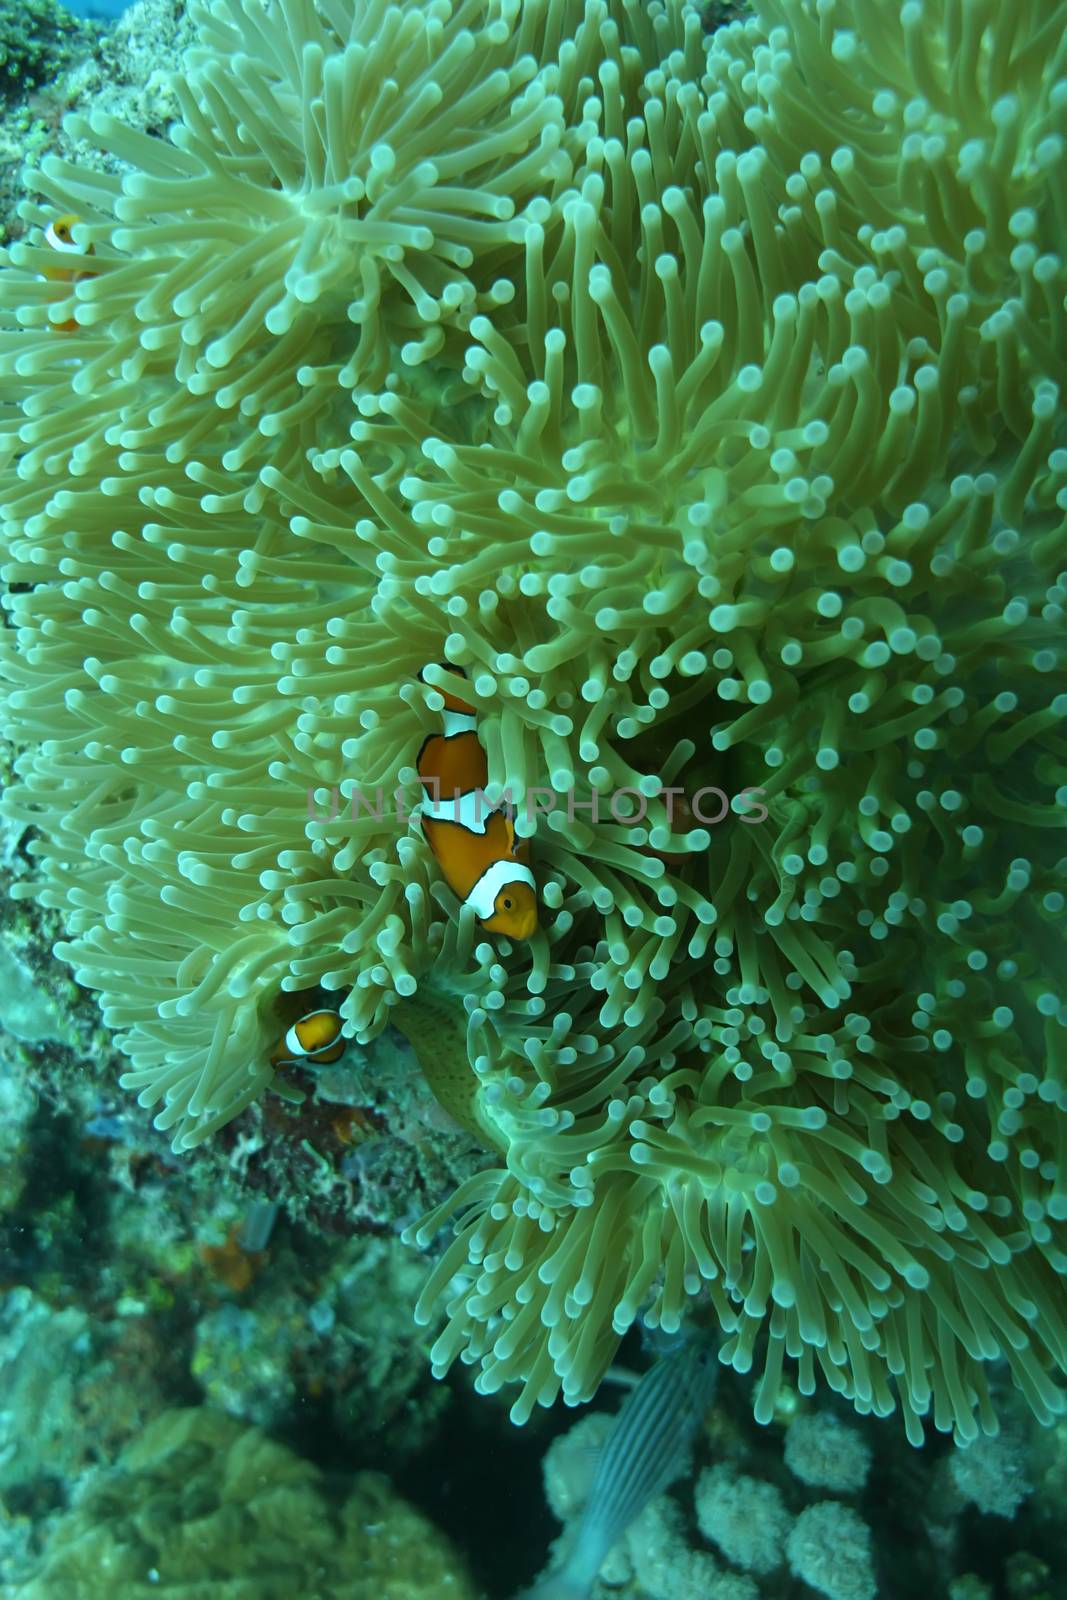 coral life diving Papua New Guinea Pacific Ocea by desant7474